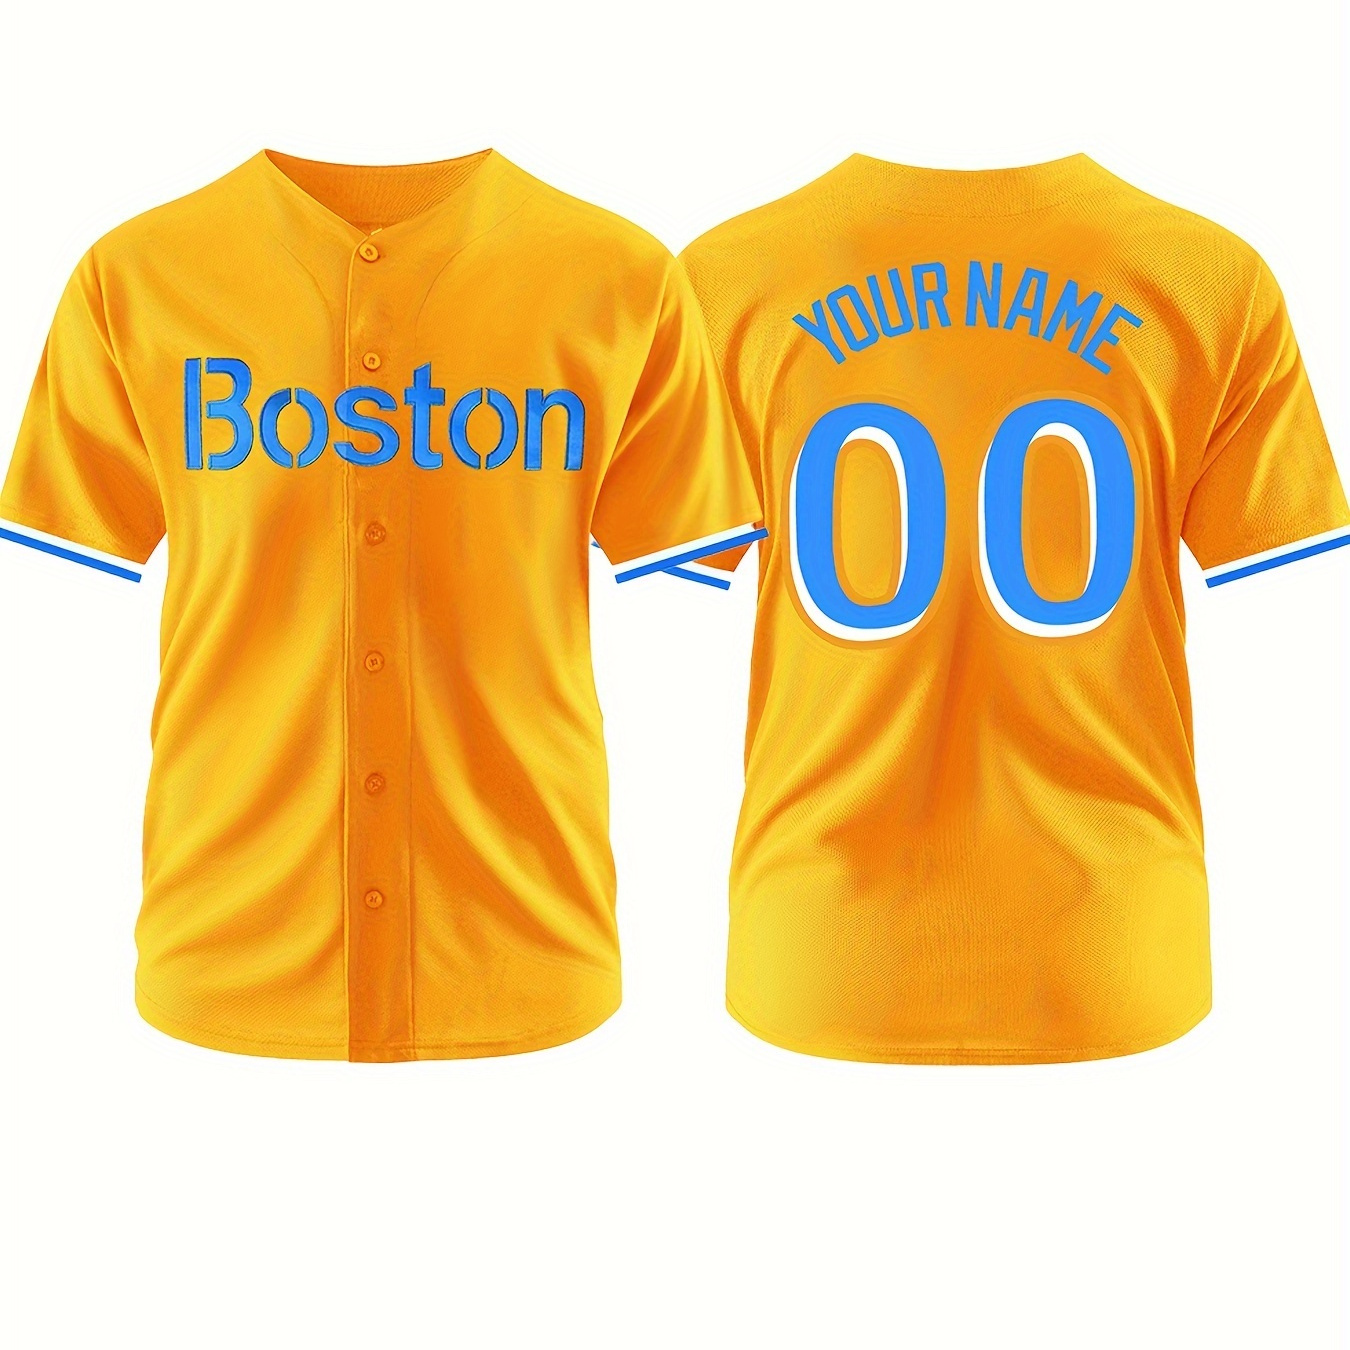 

Customizable Name And Number Men's Baseball Jersey V-neck Embroidered Outdoor Leisure Sports Customization S-3xl